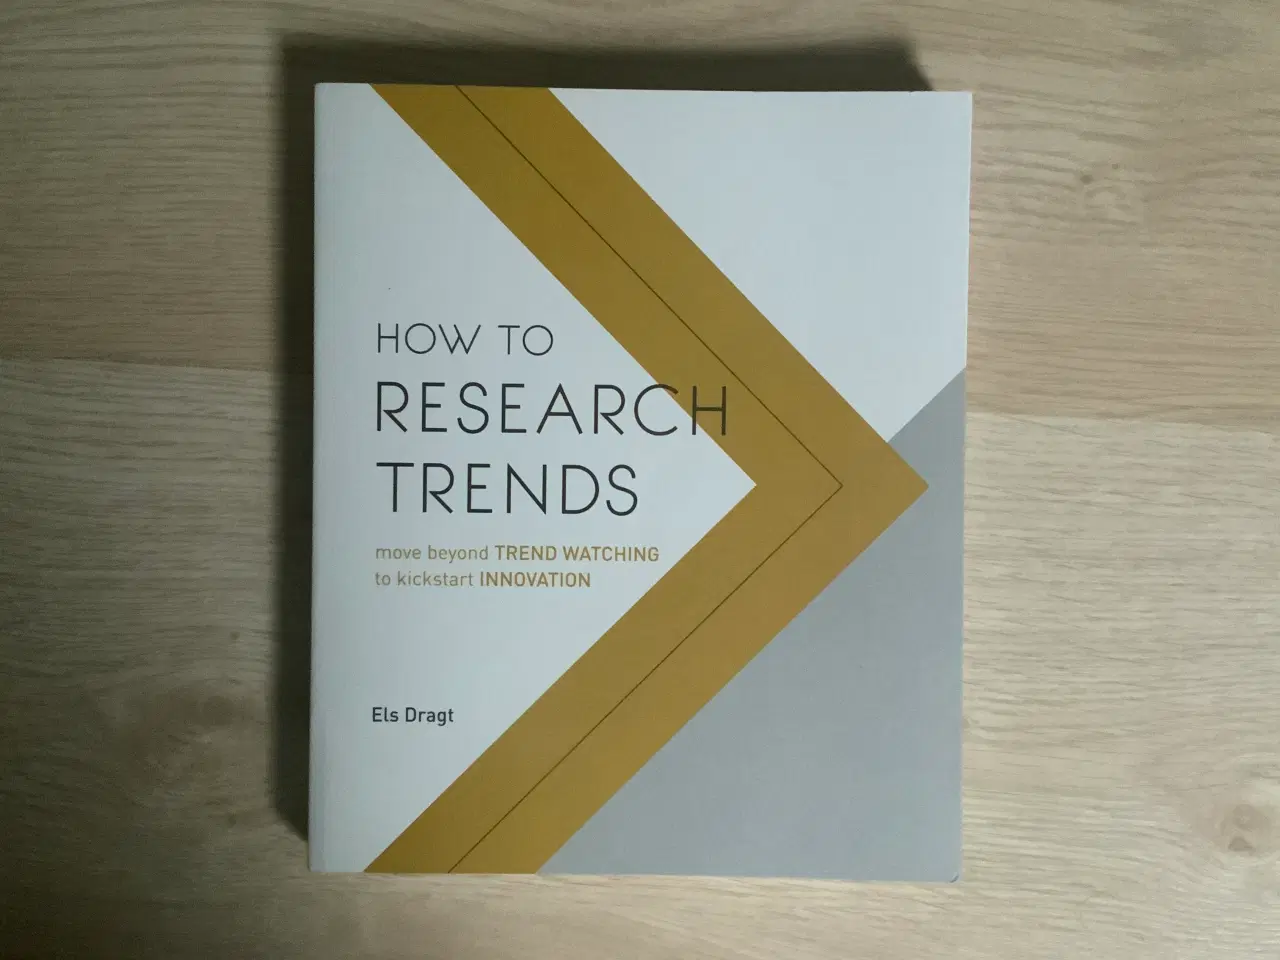 Billede 1 - How to Research Trends